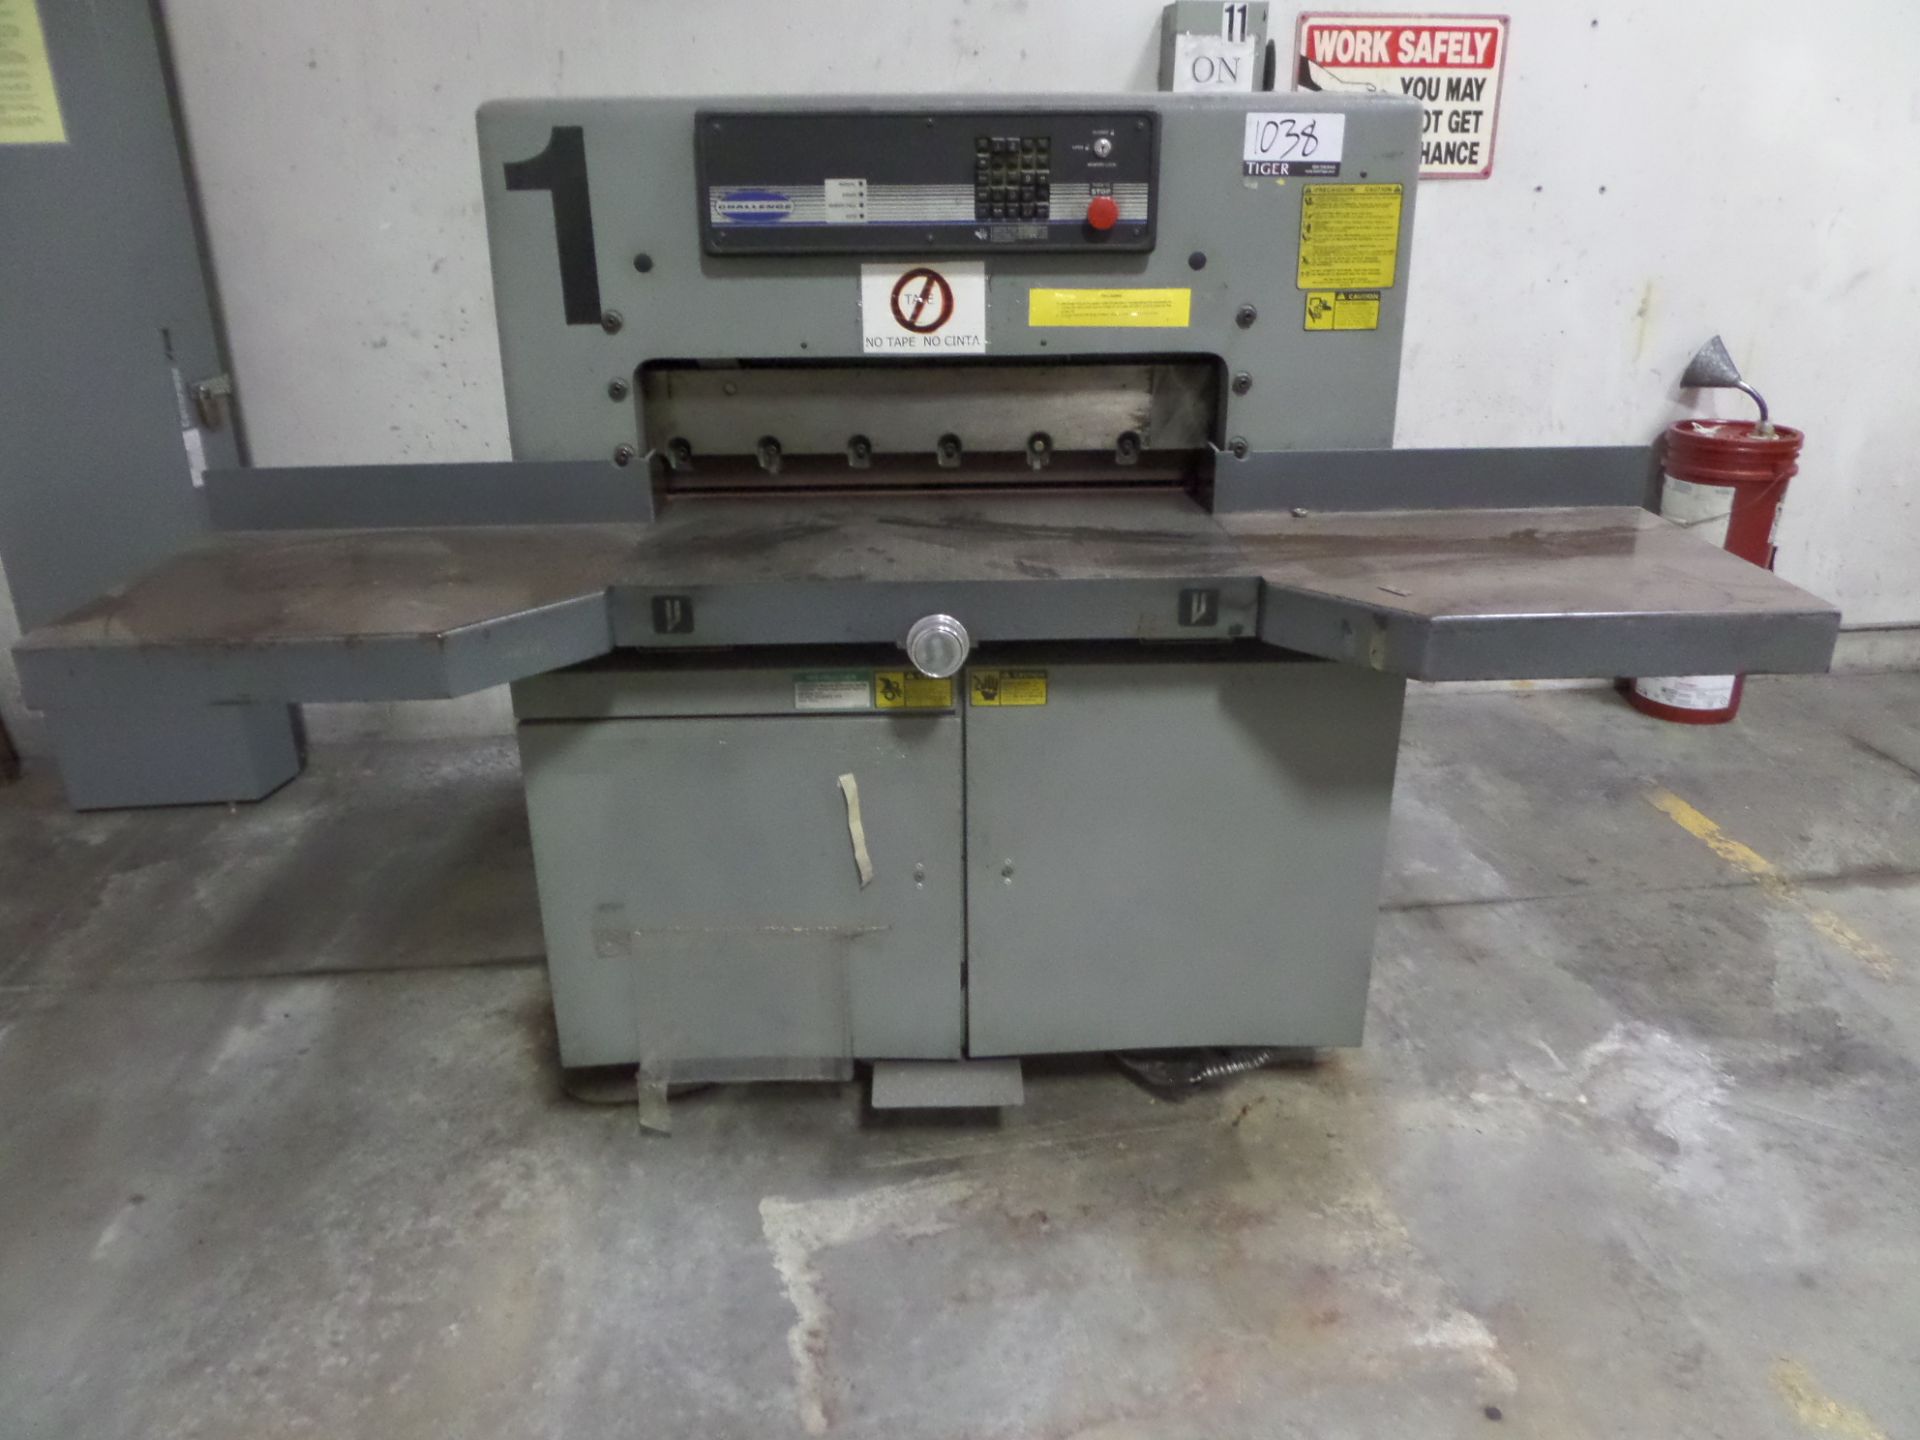 Challenge 305MPC 30.5in Paper Cutter, S/N 96409e. Asset Location: Production Floor, Site Location: